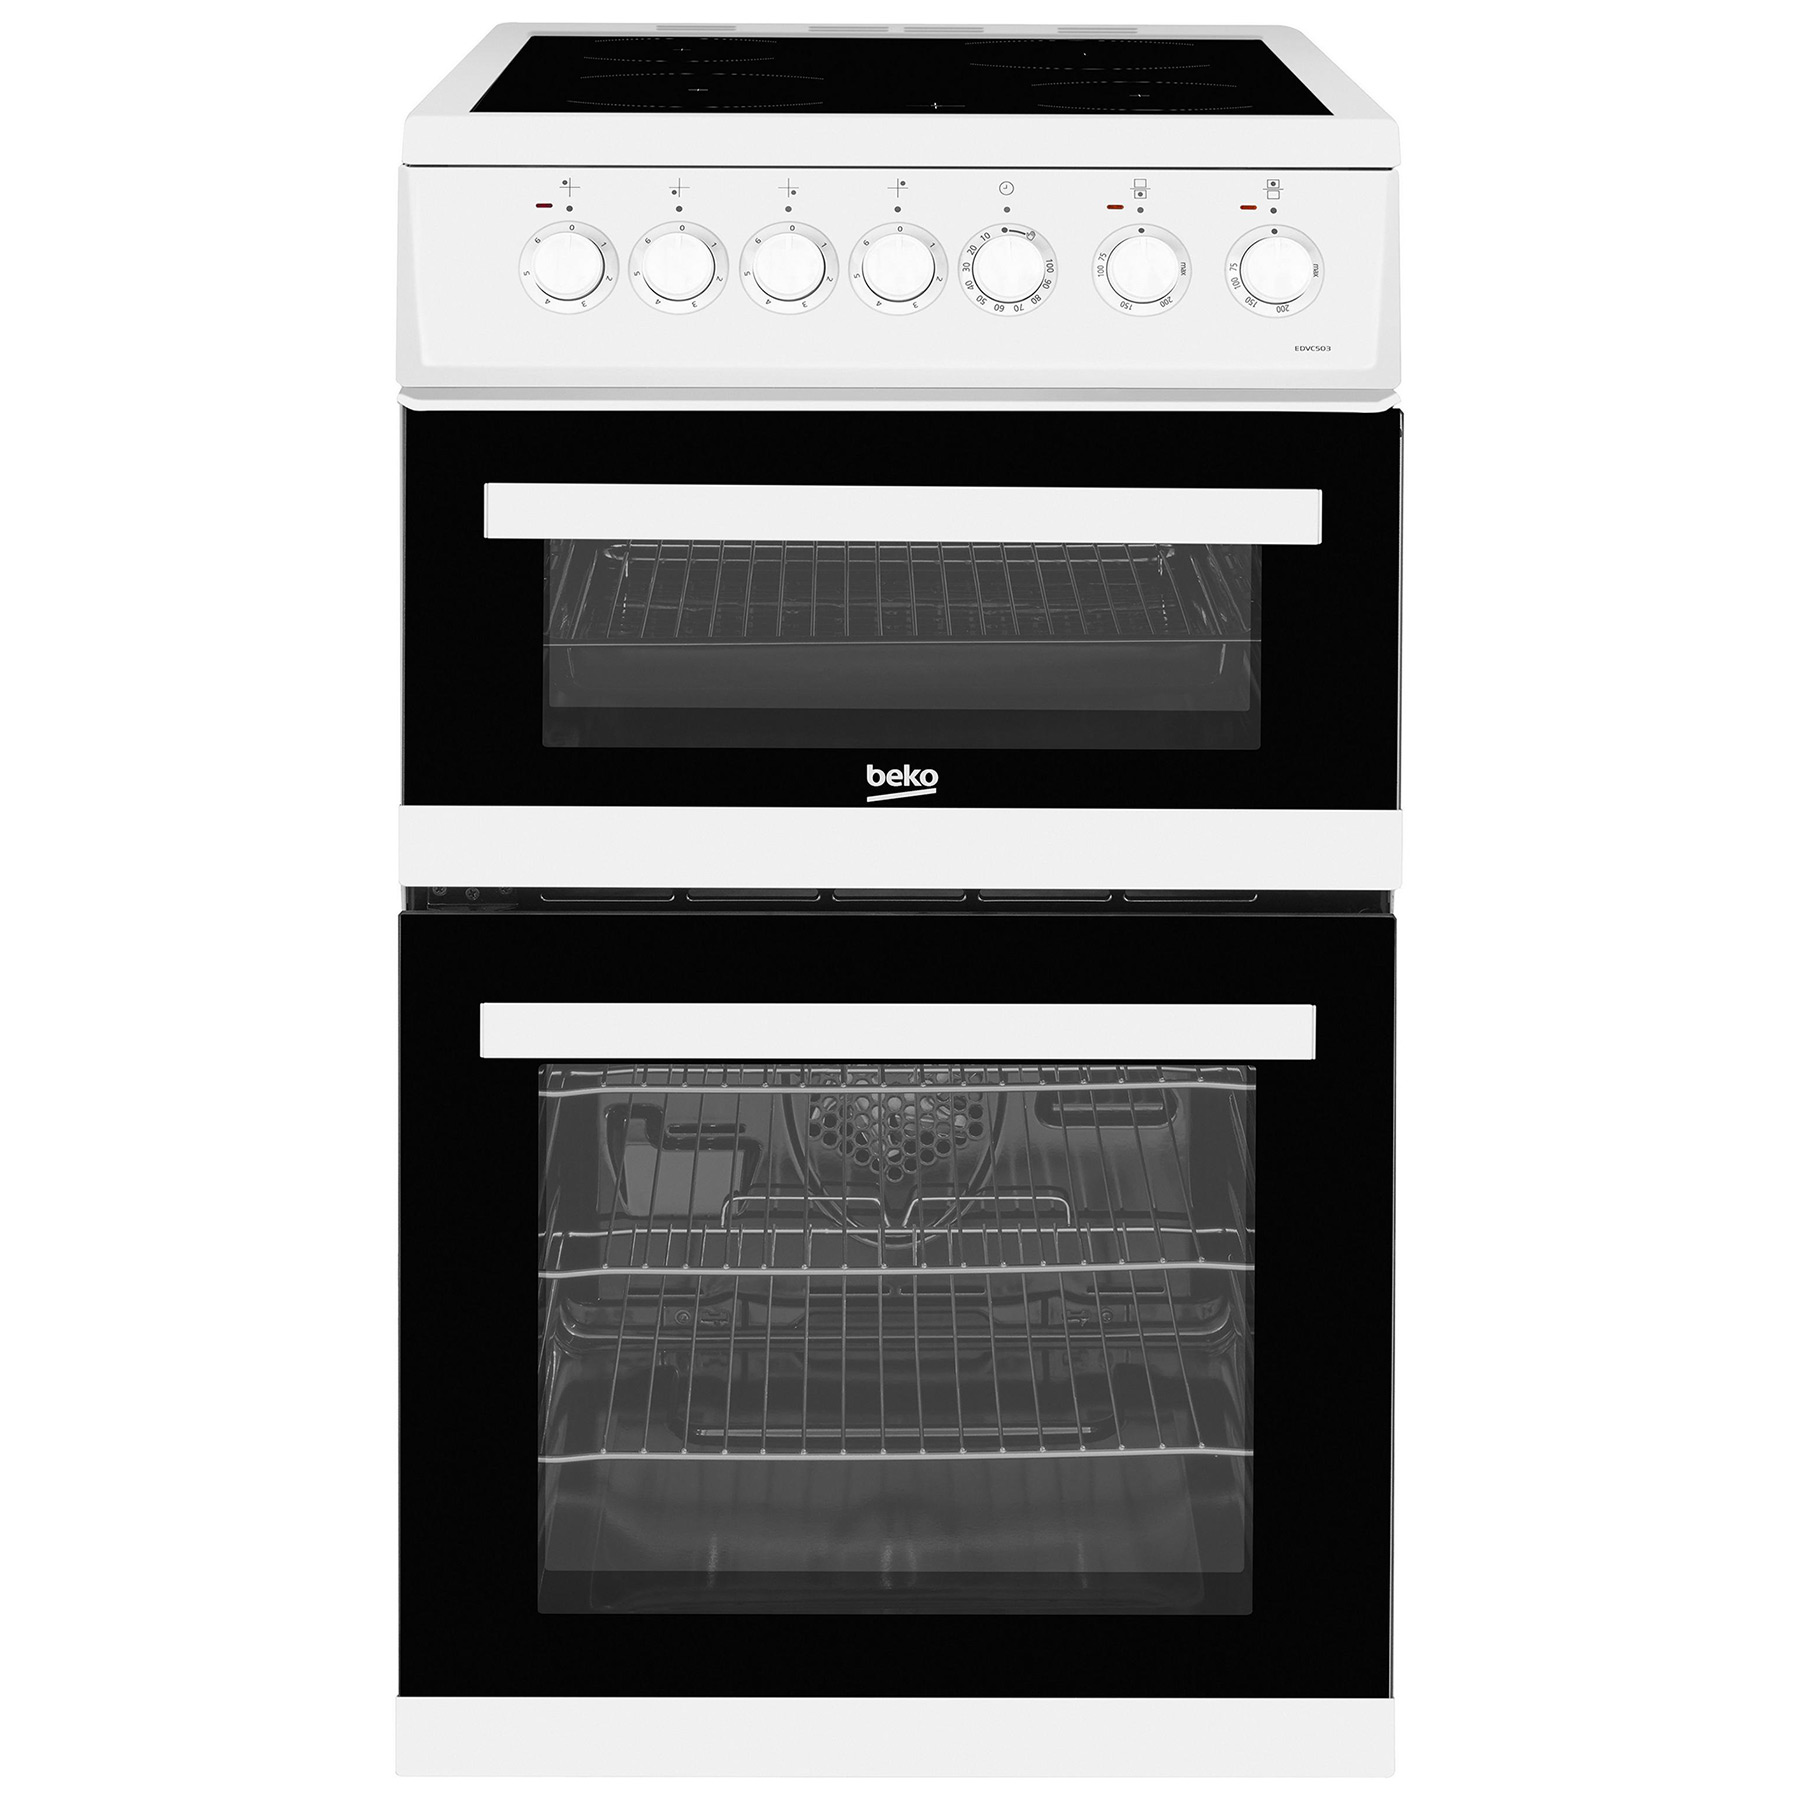 Image of Beko EDVC503W 50cm Double Oven Electric Cooker in White Ceramic Hob